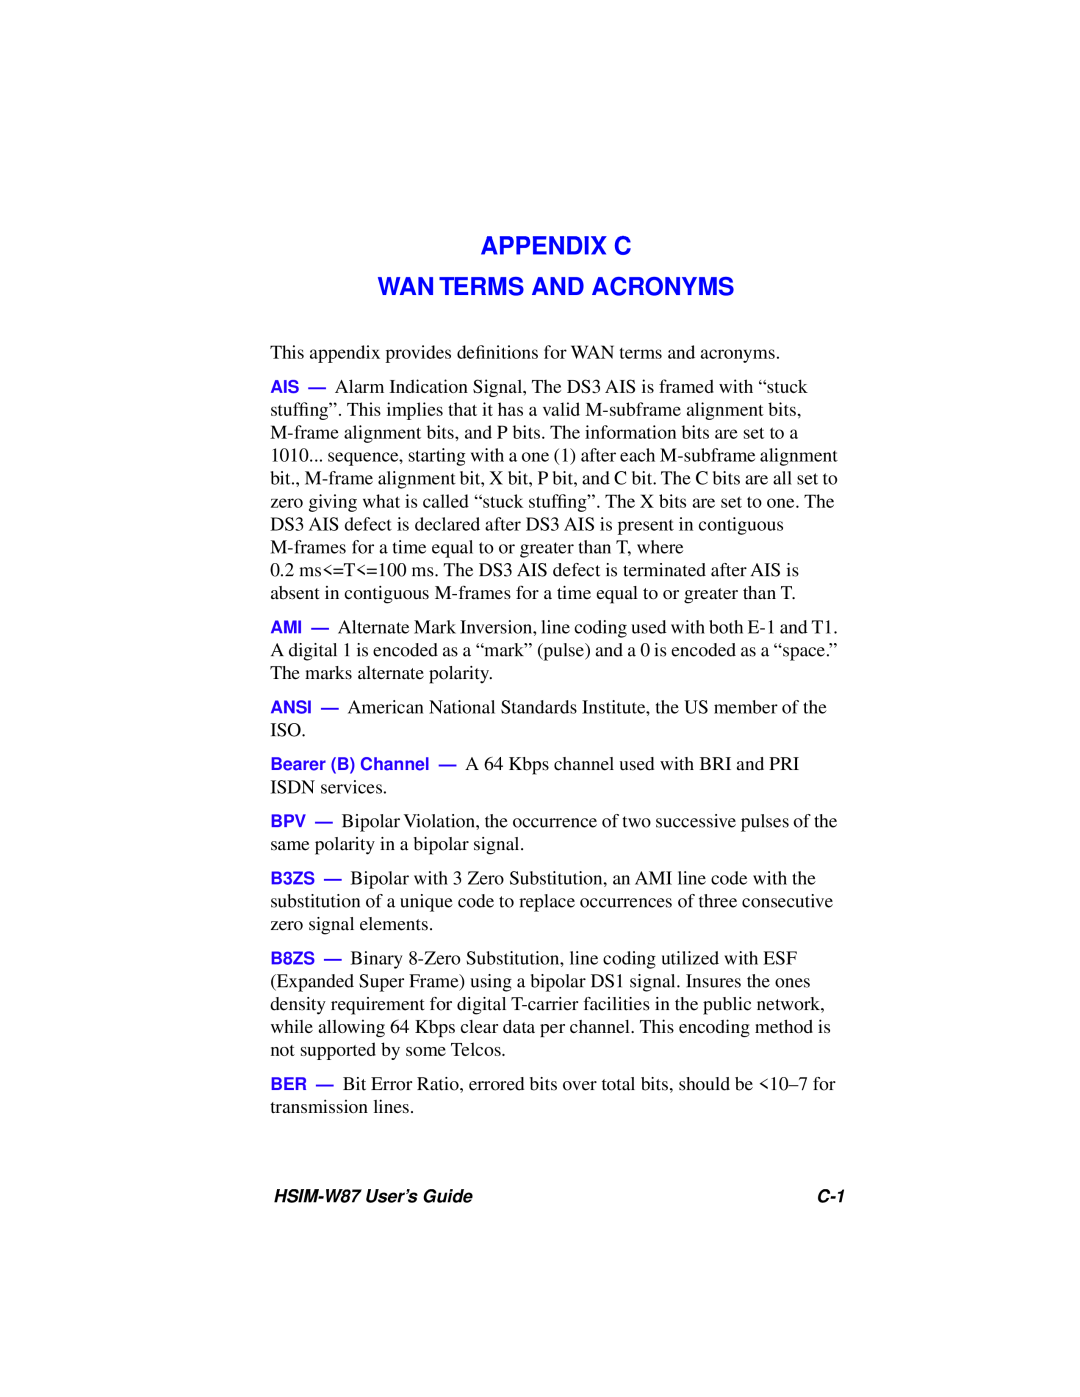 Cabletron Systems HSIM-W87 manual Appendix C Wan Terms And Acronyms 